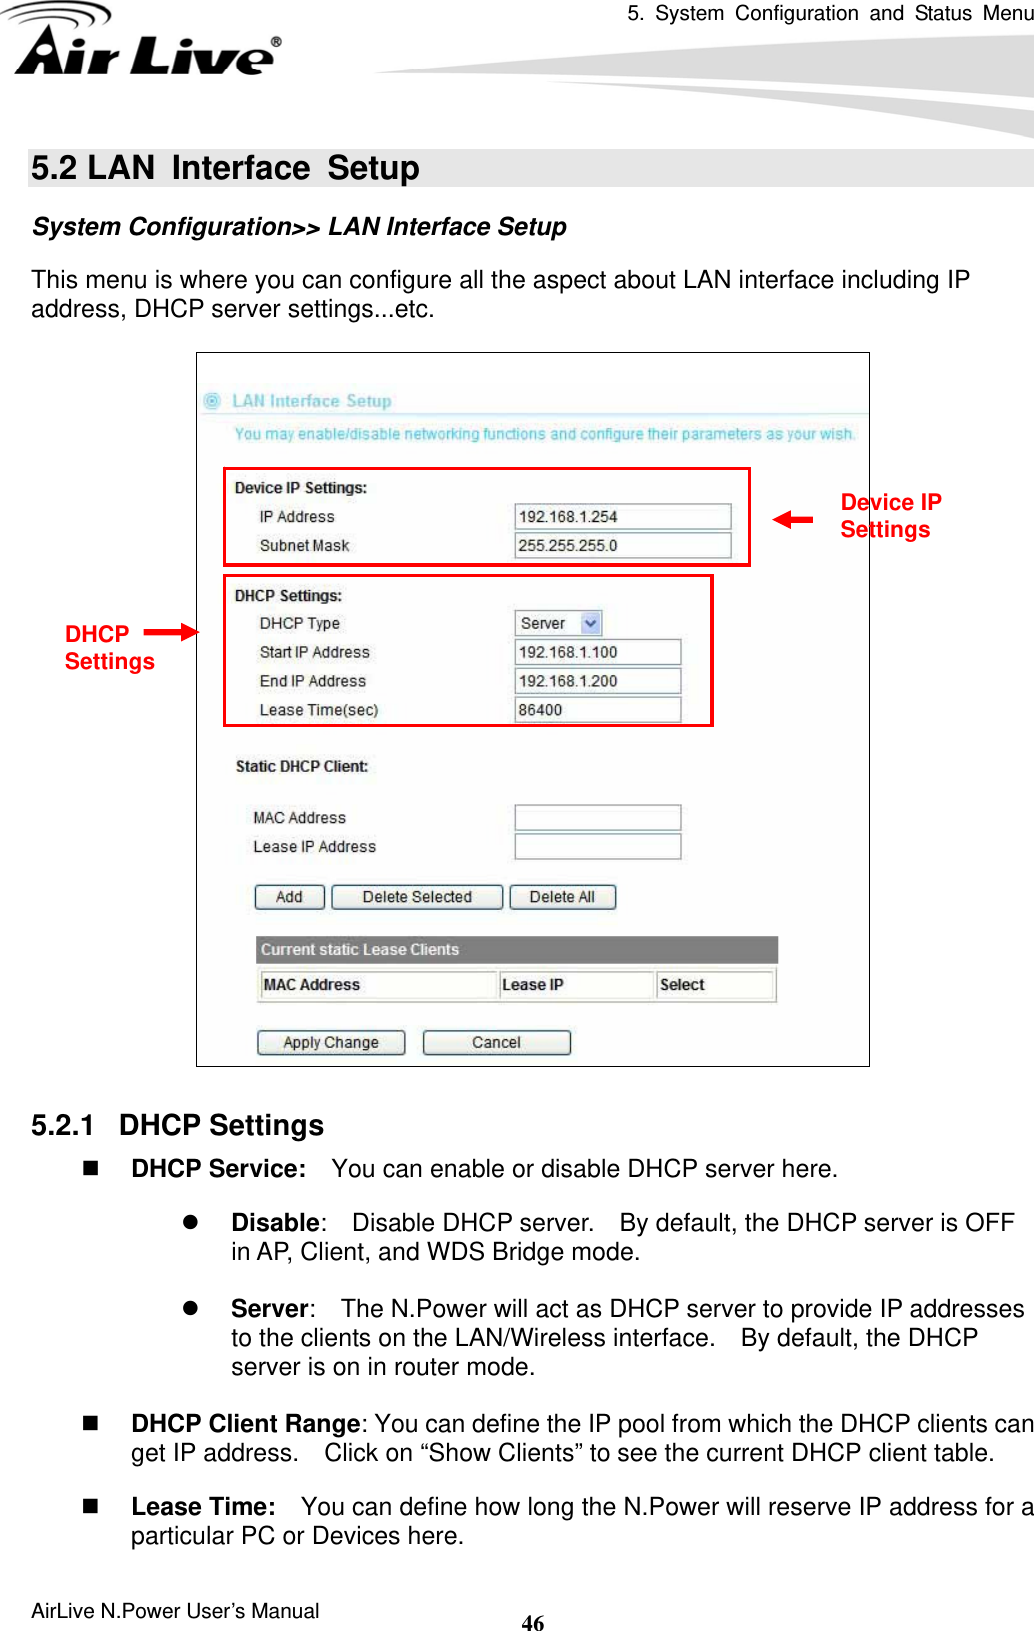 5. System Configuration and Status Menu  AirLive N.Power User’s Manual  465.2 LAN  Interface  Setup System Configuration&gt;&gt; LAN Interface Setup This menu is where you can configure all the aspect about LAN interface including IP address, DHCP server settings...etc.    5.2.1   DHCP Settings  DHCP Service:    You can enable or disable DHCP server here. z Disable:    Disable DHCP server.    By default, the DHCP server is OFF in AP, Client, and WDS Bridge mode.  z Server:    The N.Power will act as DHCP server to provide IP addresses to the clients on the LAN/Wireless interface.    By default, the DHCP server is on in router mode.   DHCP Client Range: You can define the IP pool from which the DHCP clients can get IP address.    Click on “Show Clients” to see the current DHCP client table.  Lease Time:    You can define how long the N.Power will reserve IP address for a particular PC or Devices here. Device IP Settings DHCP Settings 